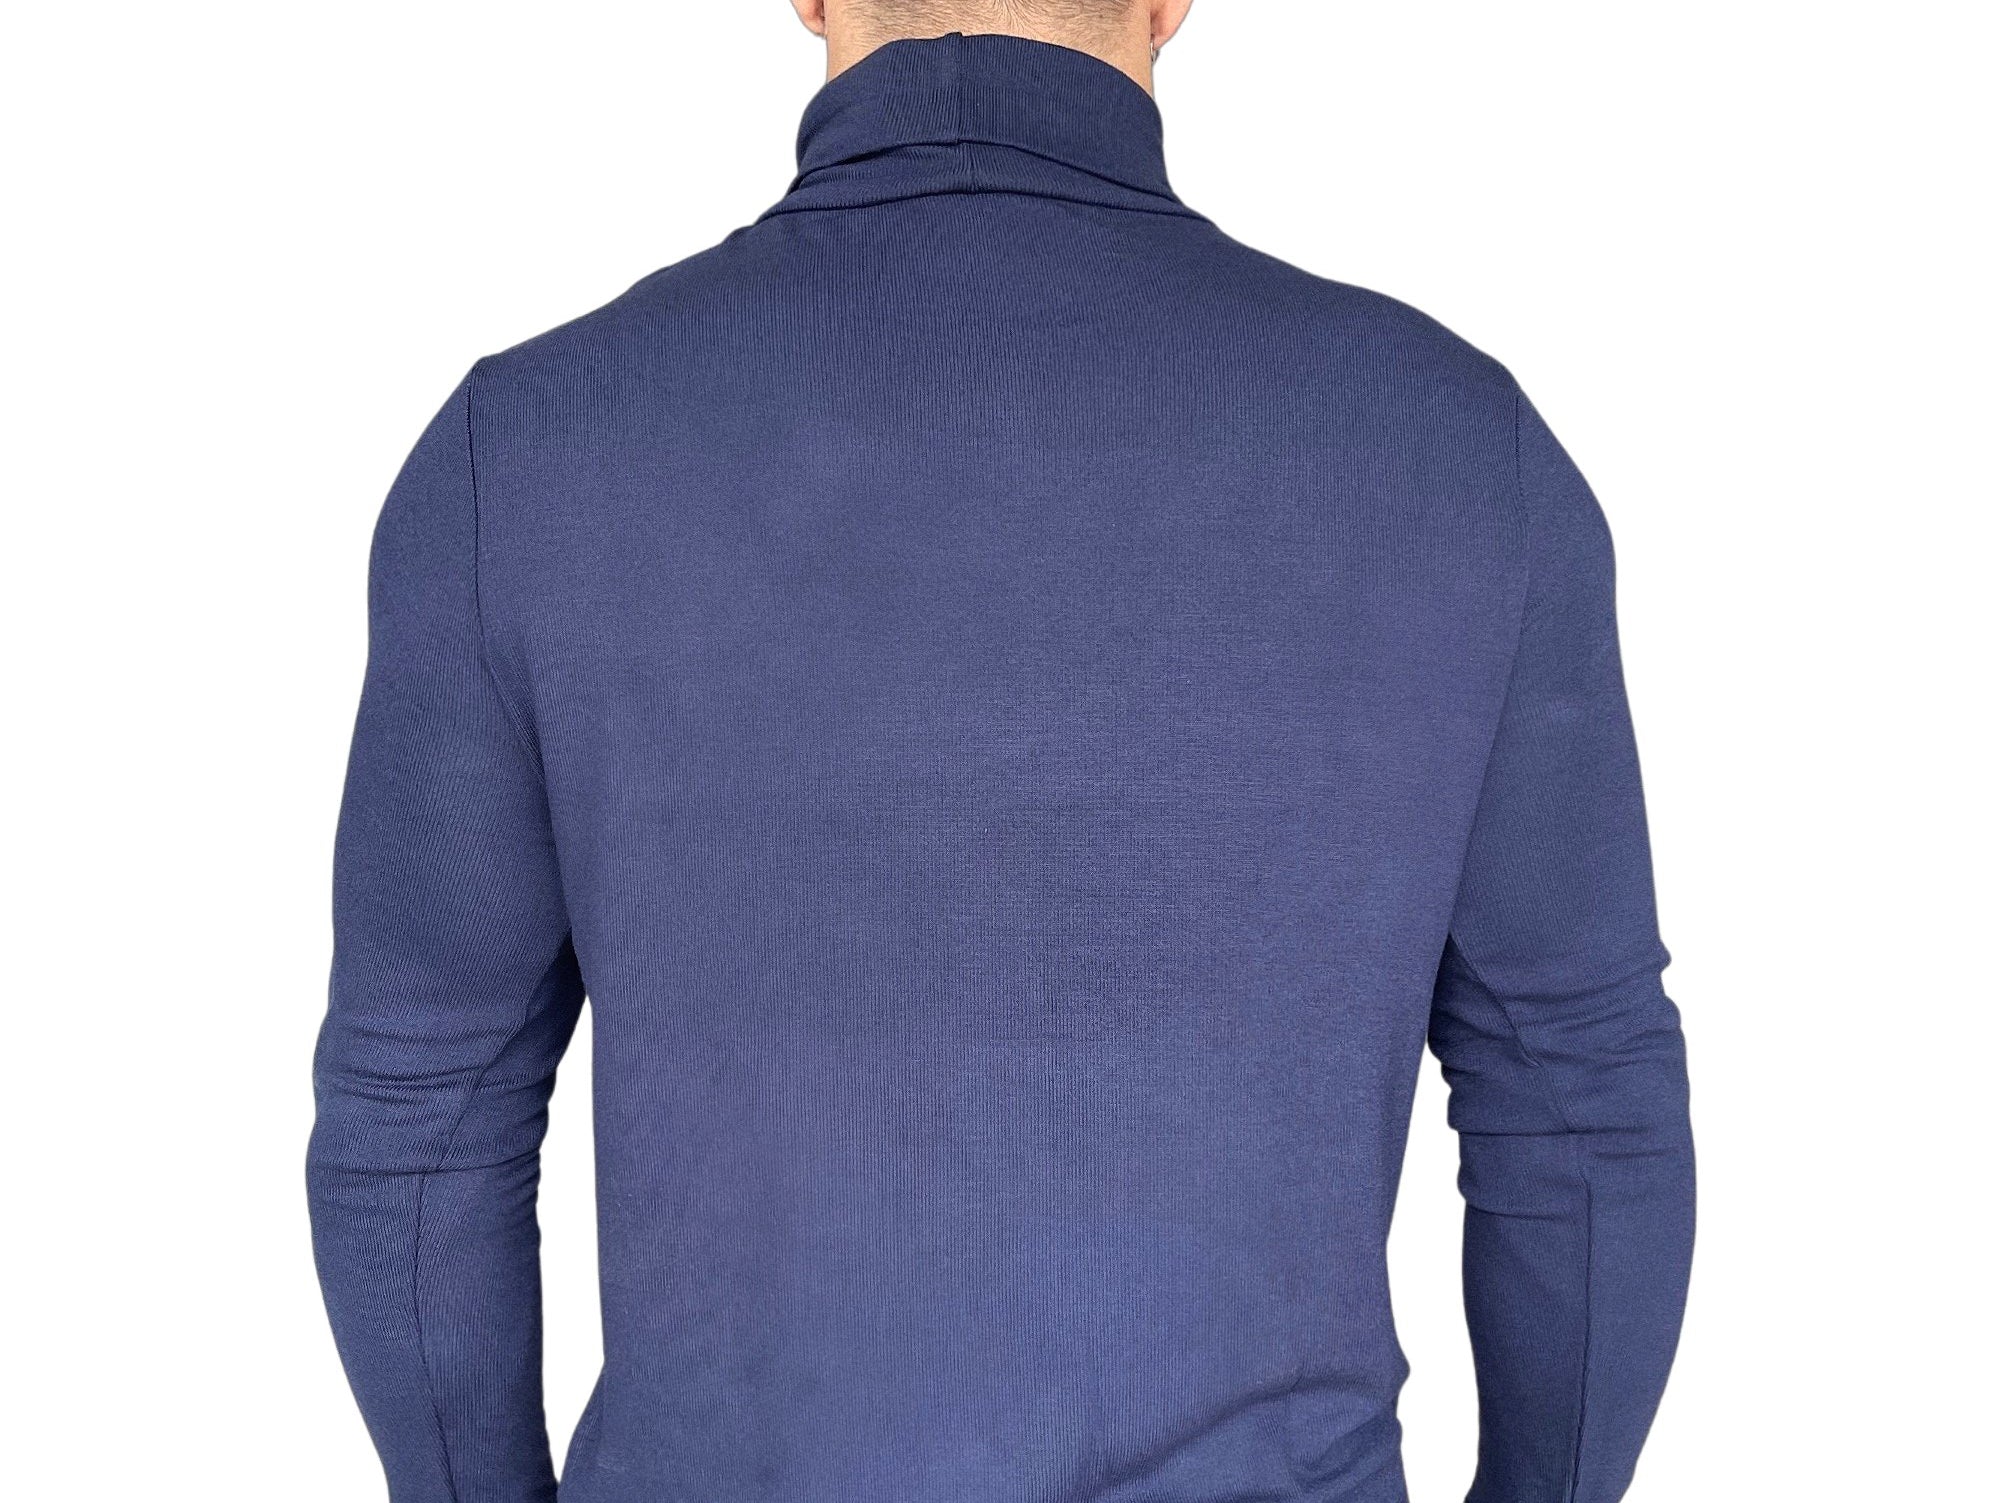 Batave - Blue Long Sleeve shirt for Men - Sarman Fashion - Wholesale Clothing Fashion Brand for Men from Canada